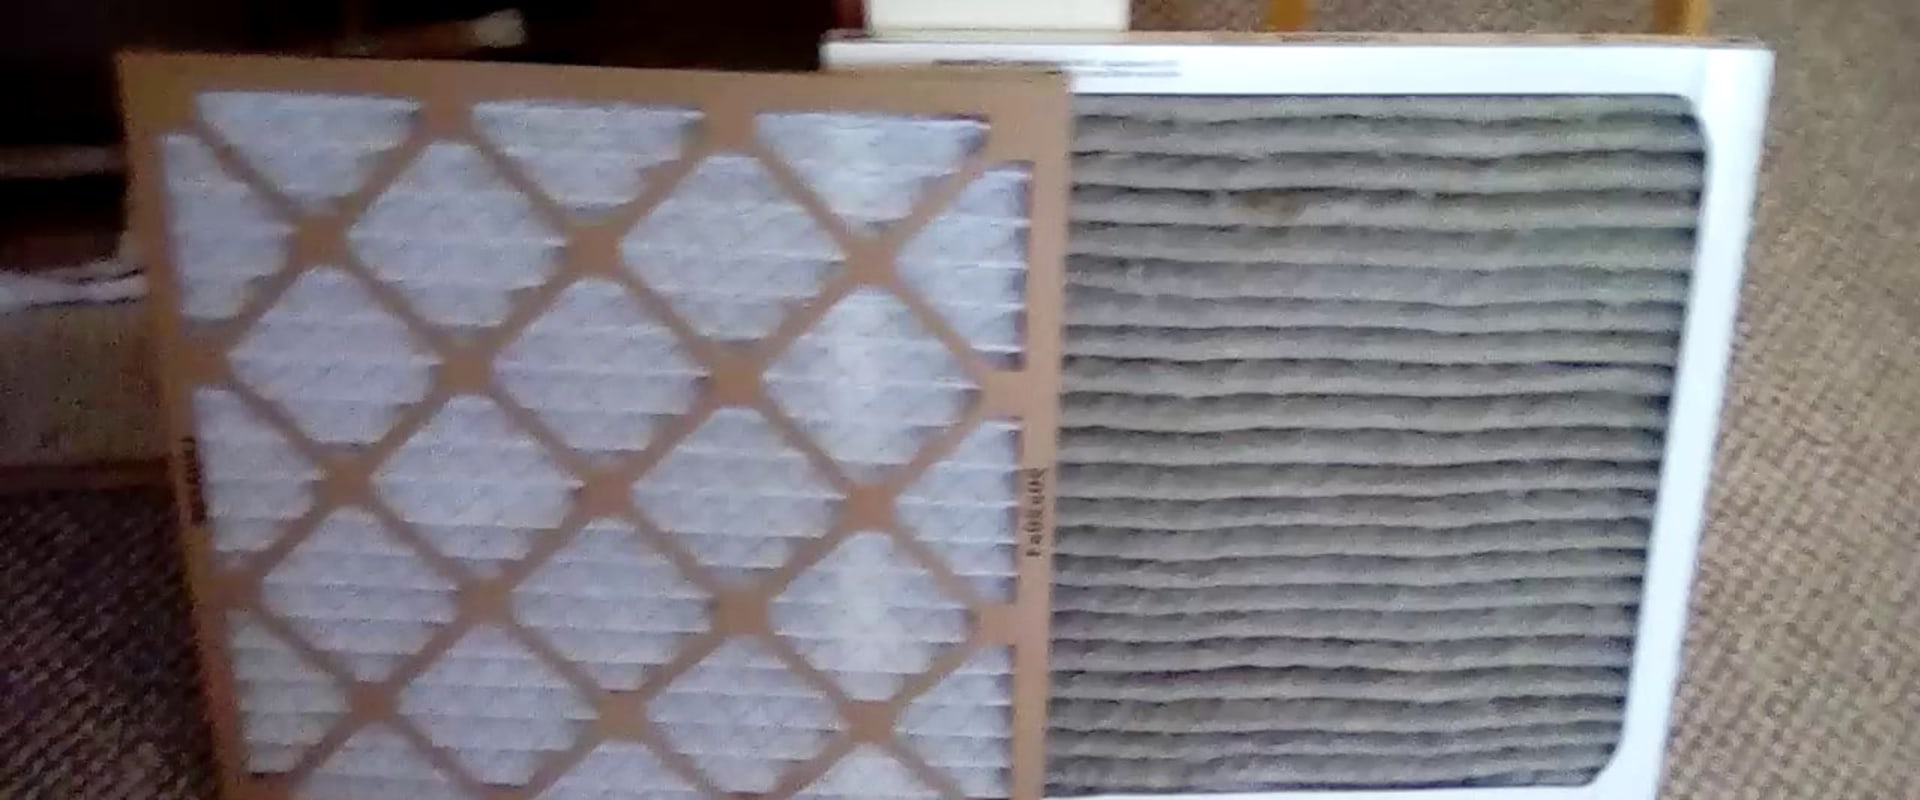 What Happens if You Don't Clean Your AC Filter?